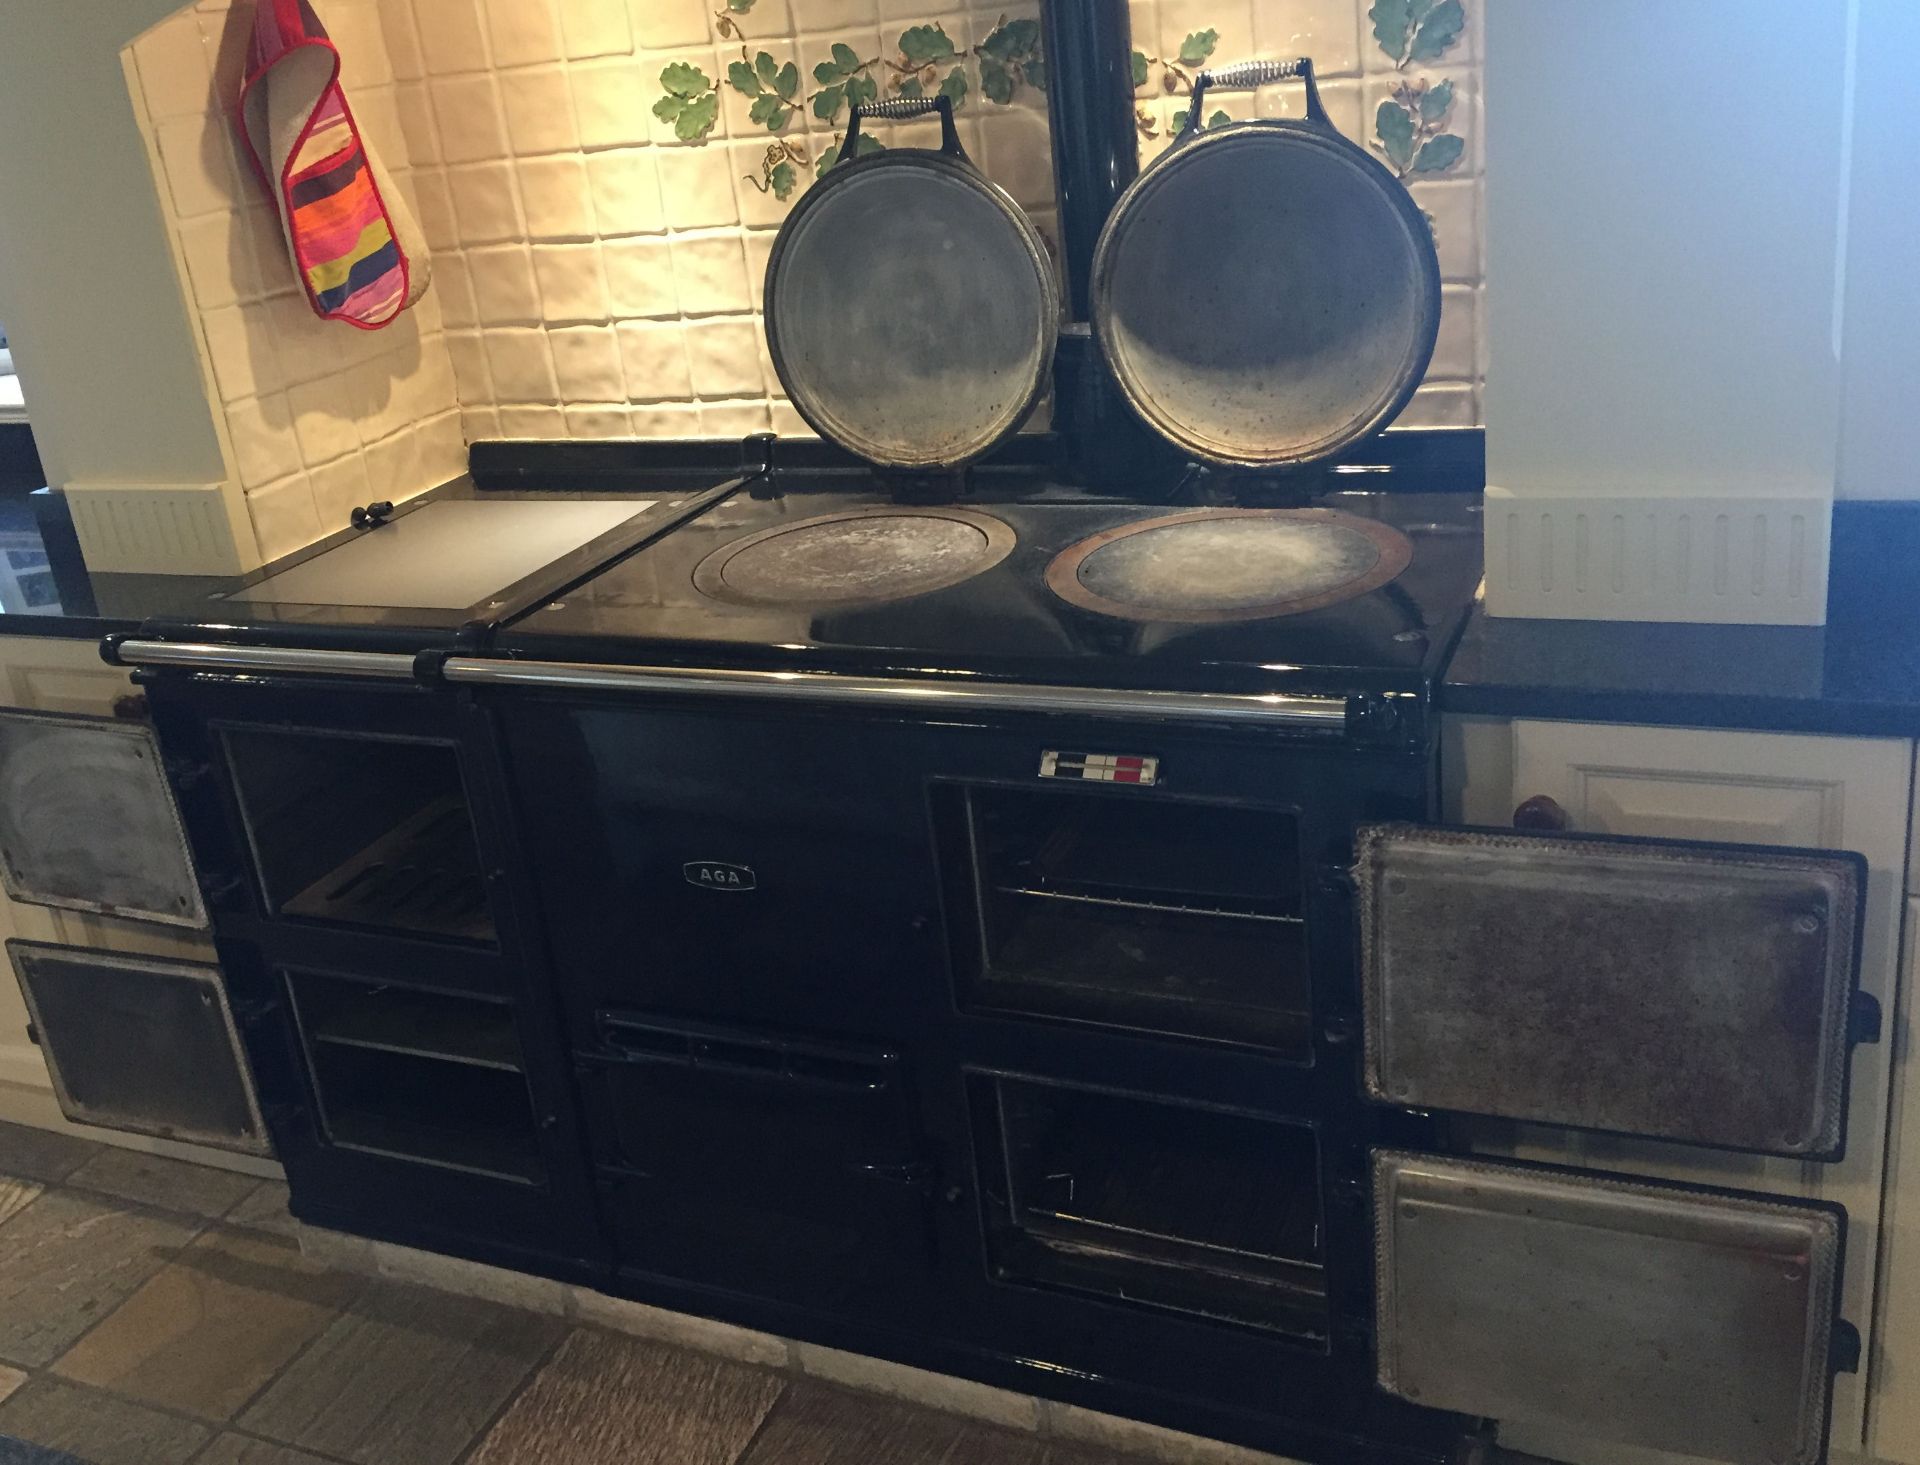 1 x Aga 4-Oven, 3-Plate Dual-Fuel Range Cooker - Cast Iron With Navy Enamel Finish With A Black Top - Image 14 of 21